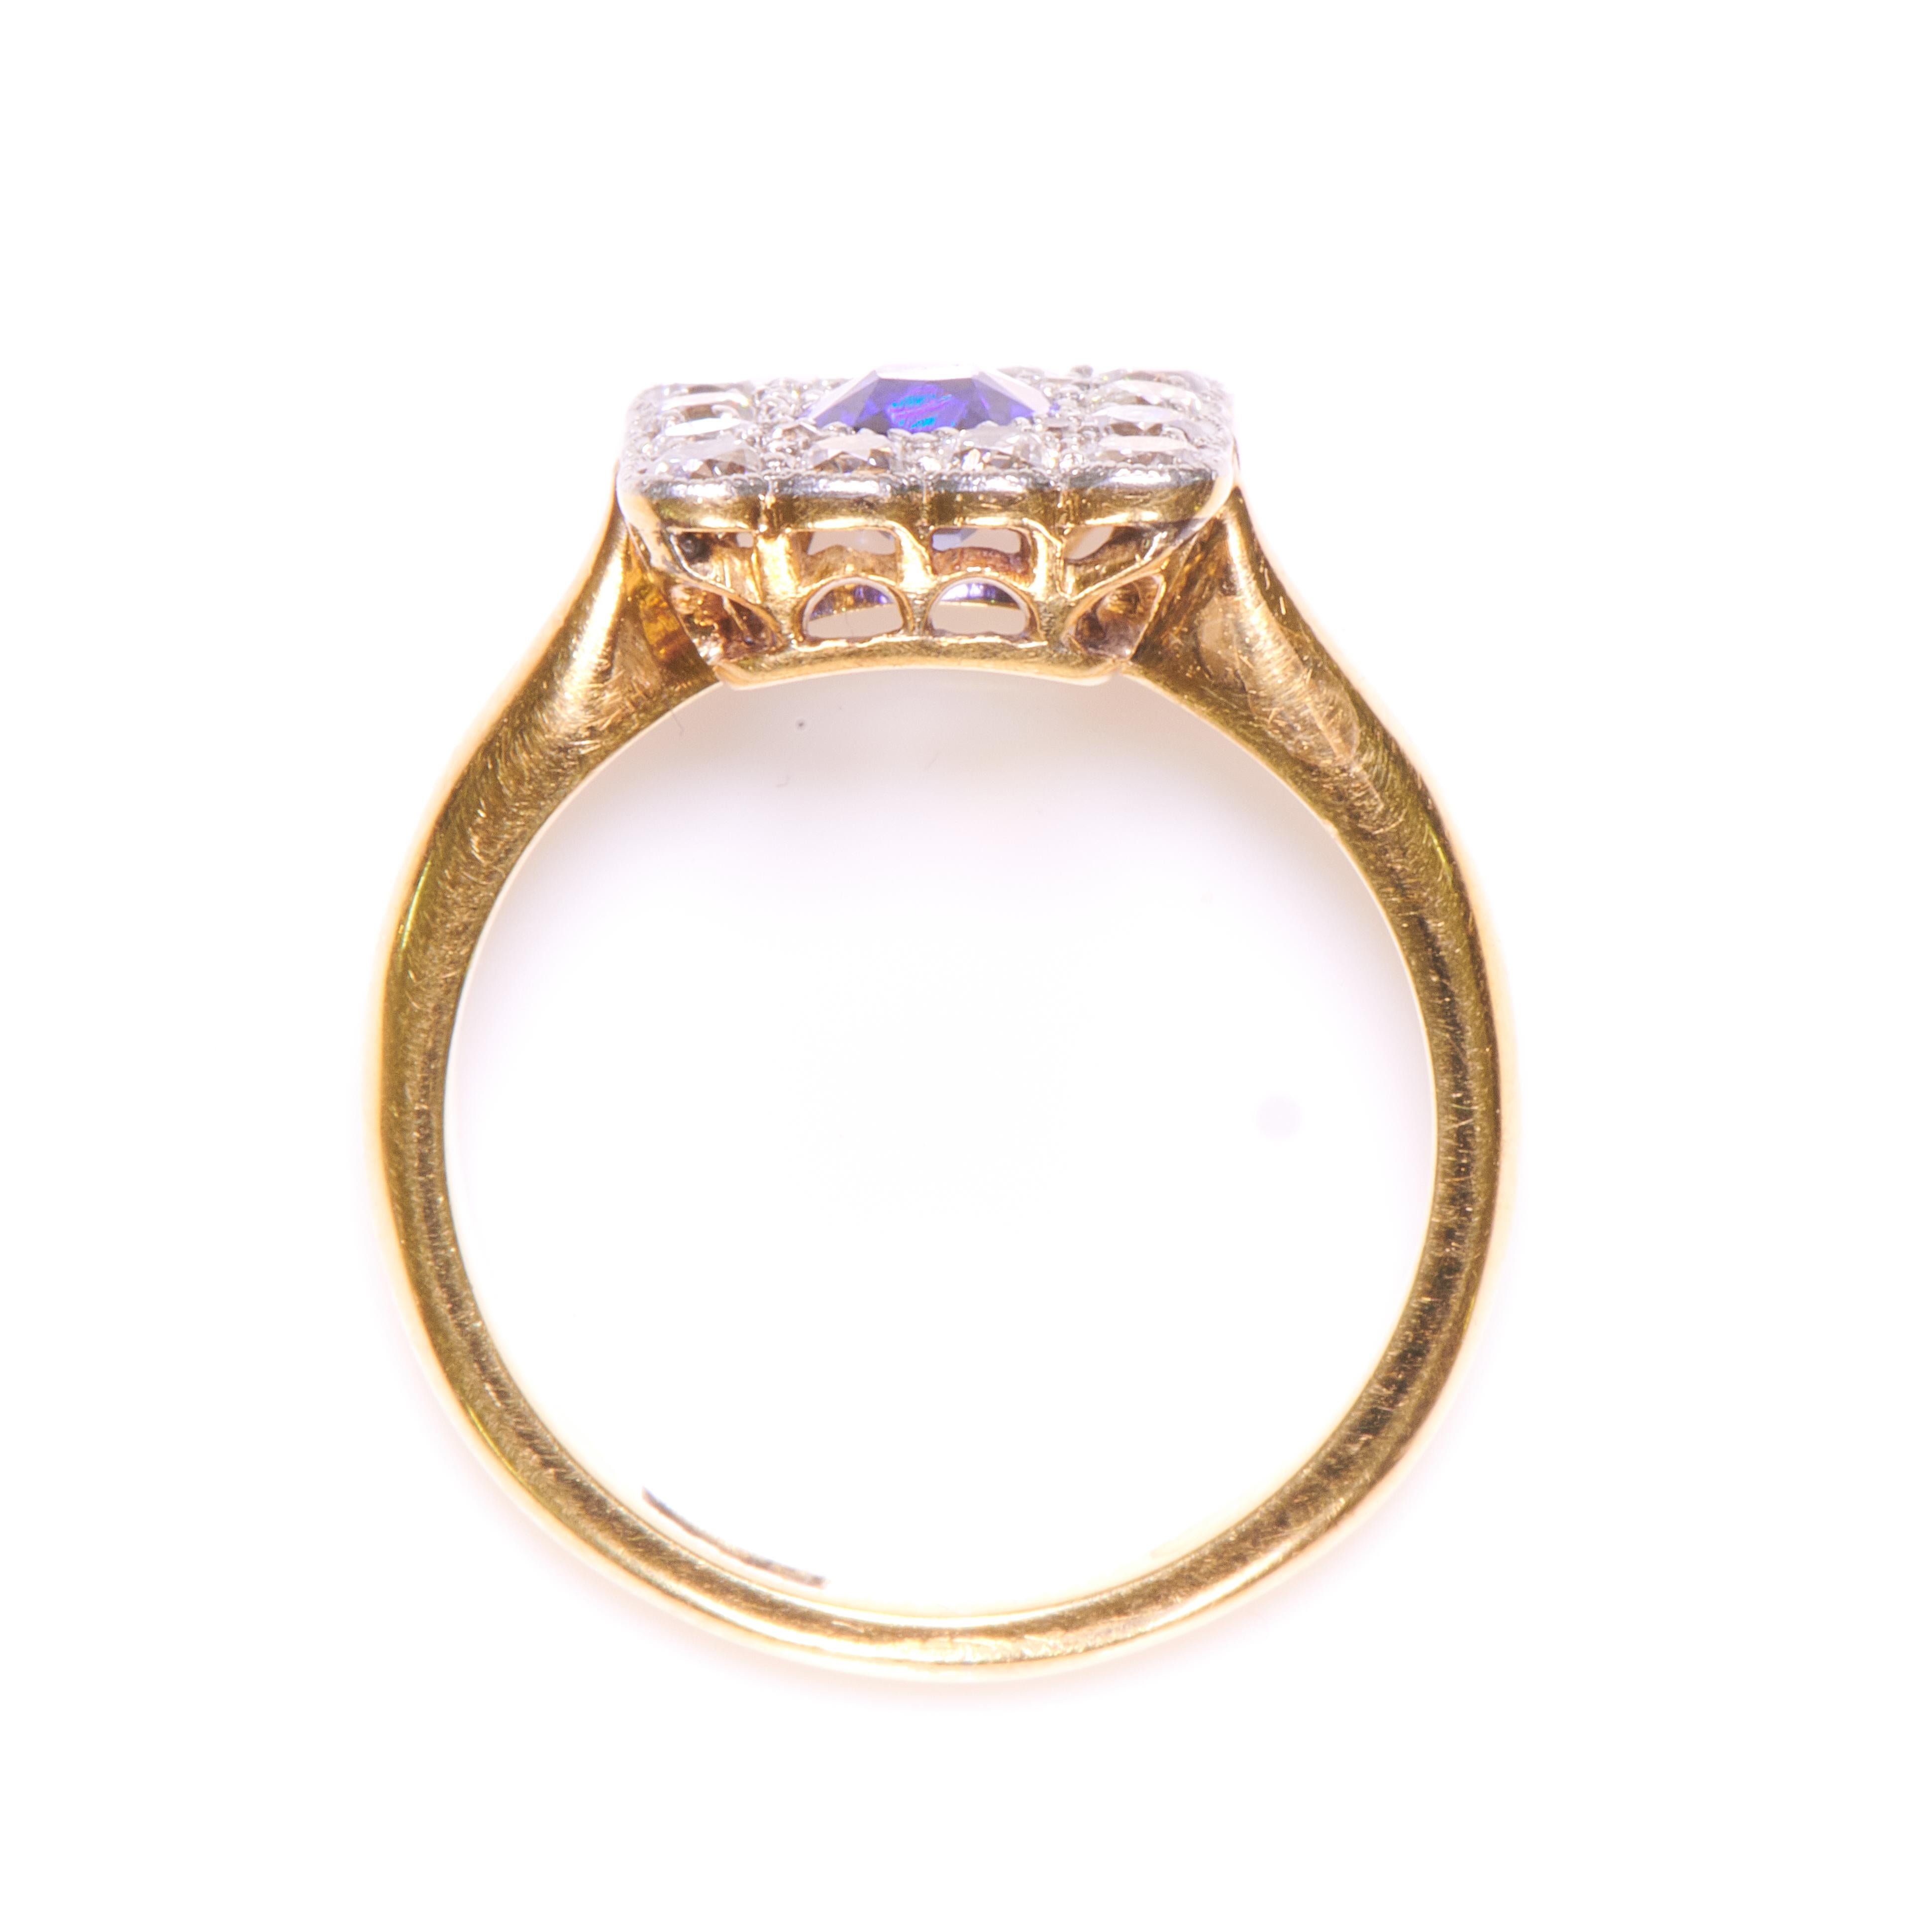 Antique, Art Deco, 18 Carat Gold, Sapphire and Diamond Engagement Ring In Excellent Condition For Sale In Rochford, Essex